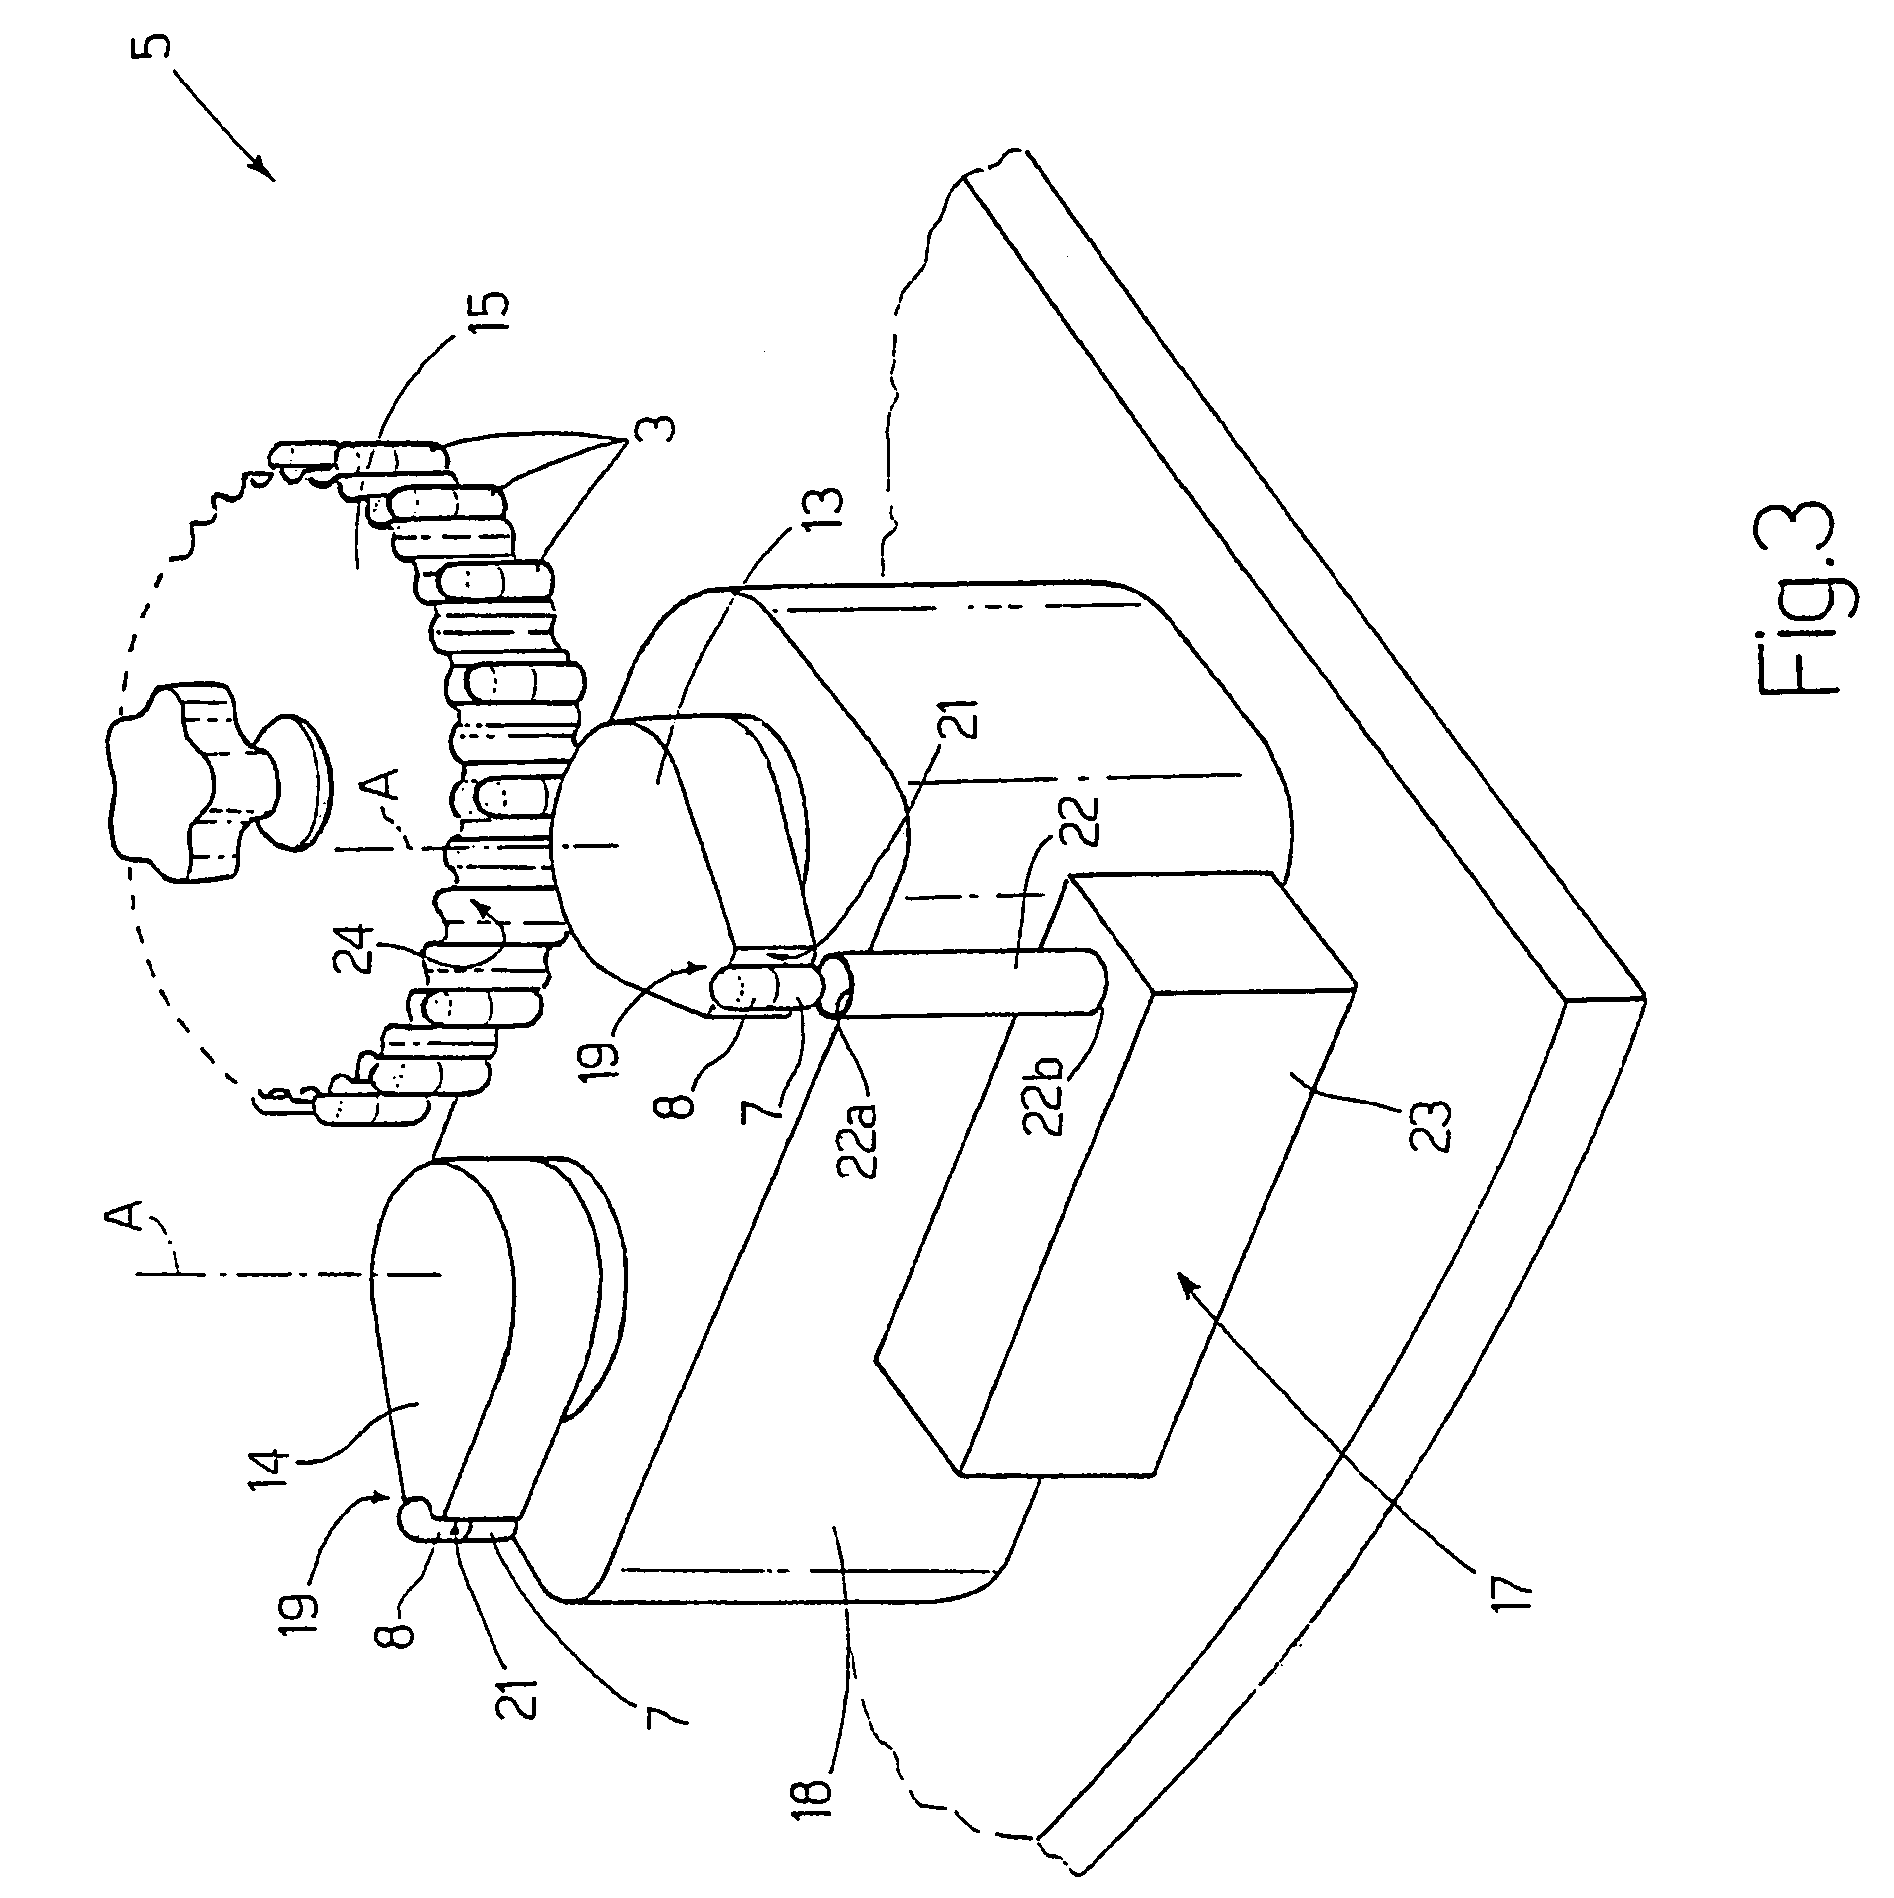 Machine for metering a product into capsules